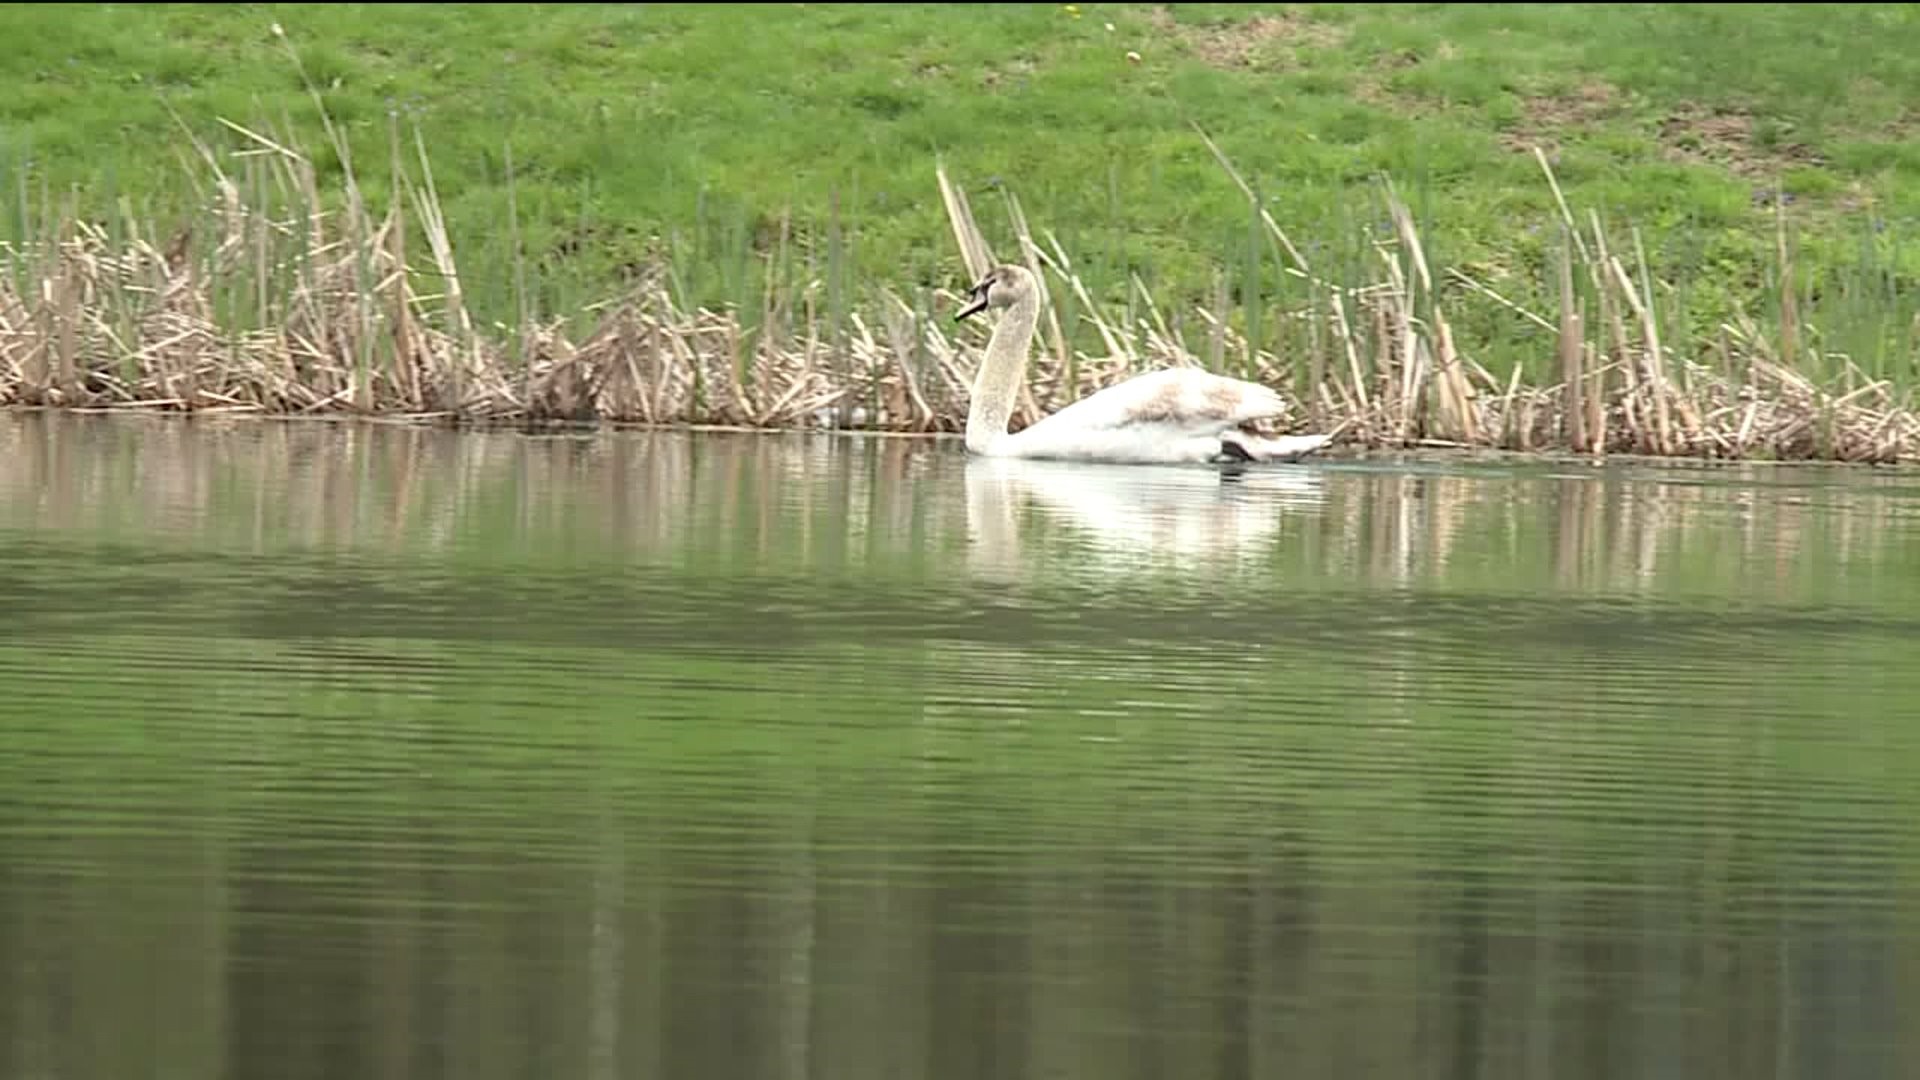 Swan Found, Looking For Its Mate